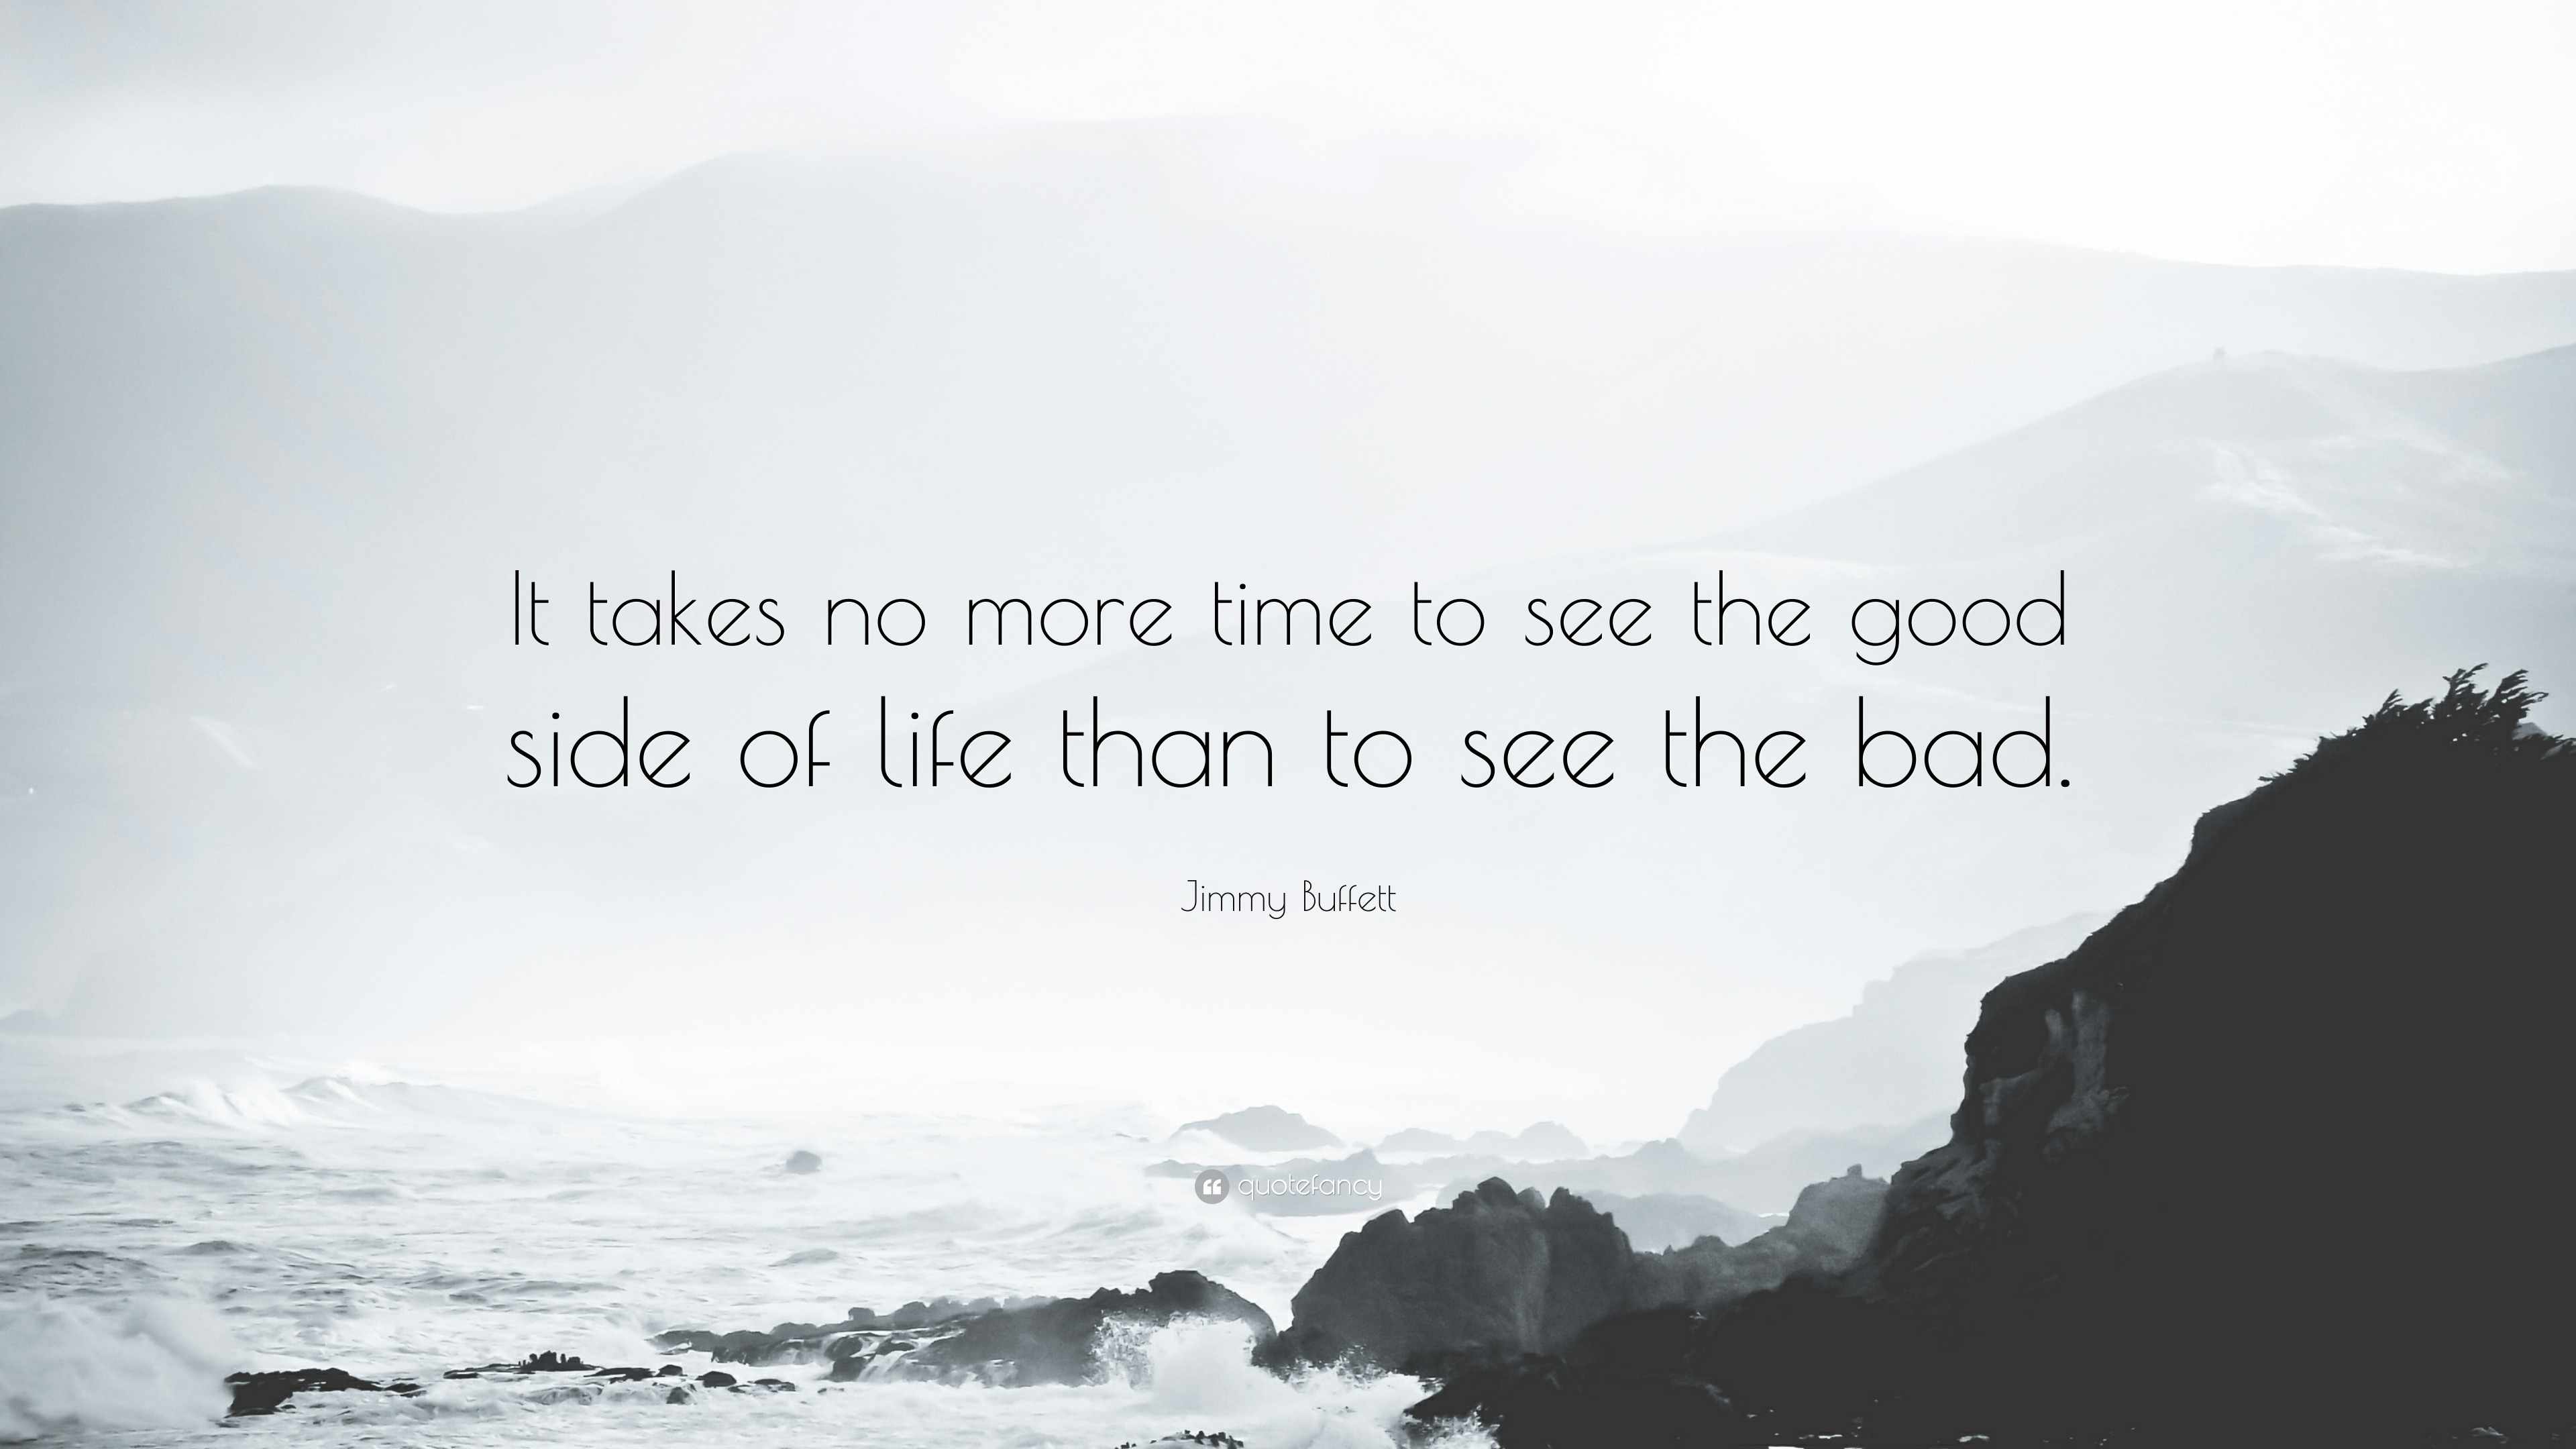 Jimmy Buffett Quote “It takes no more time to see the good side of